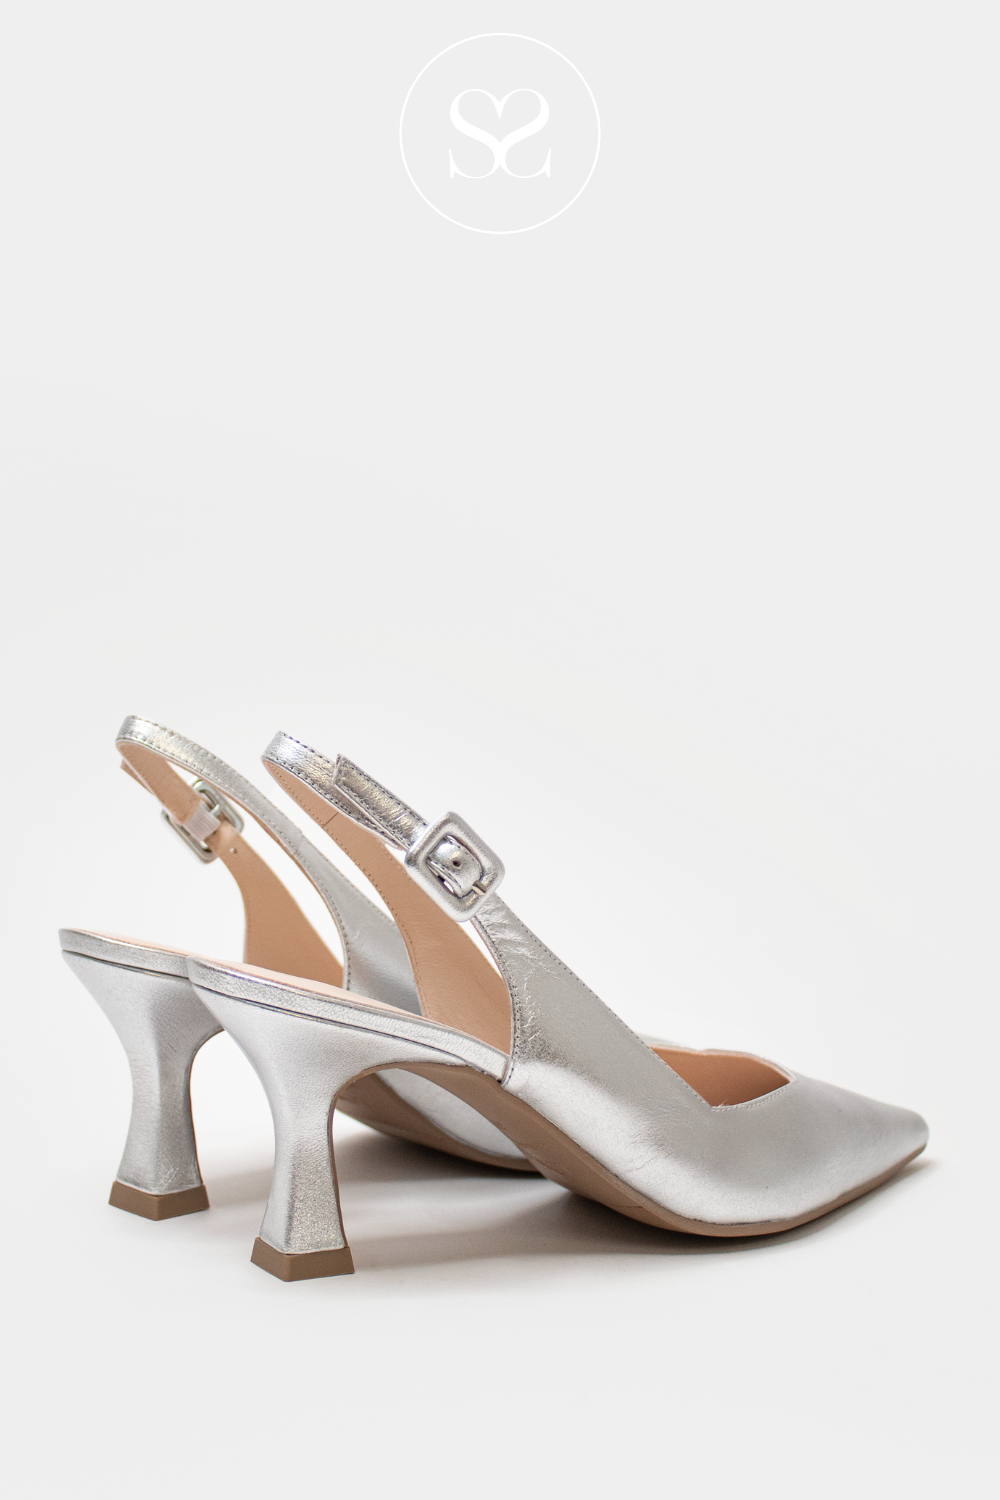 LODI SILVER SLING BACK PUMPS WITH LOW HEEL